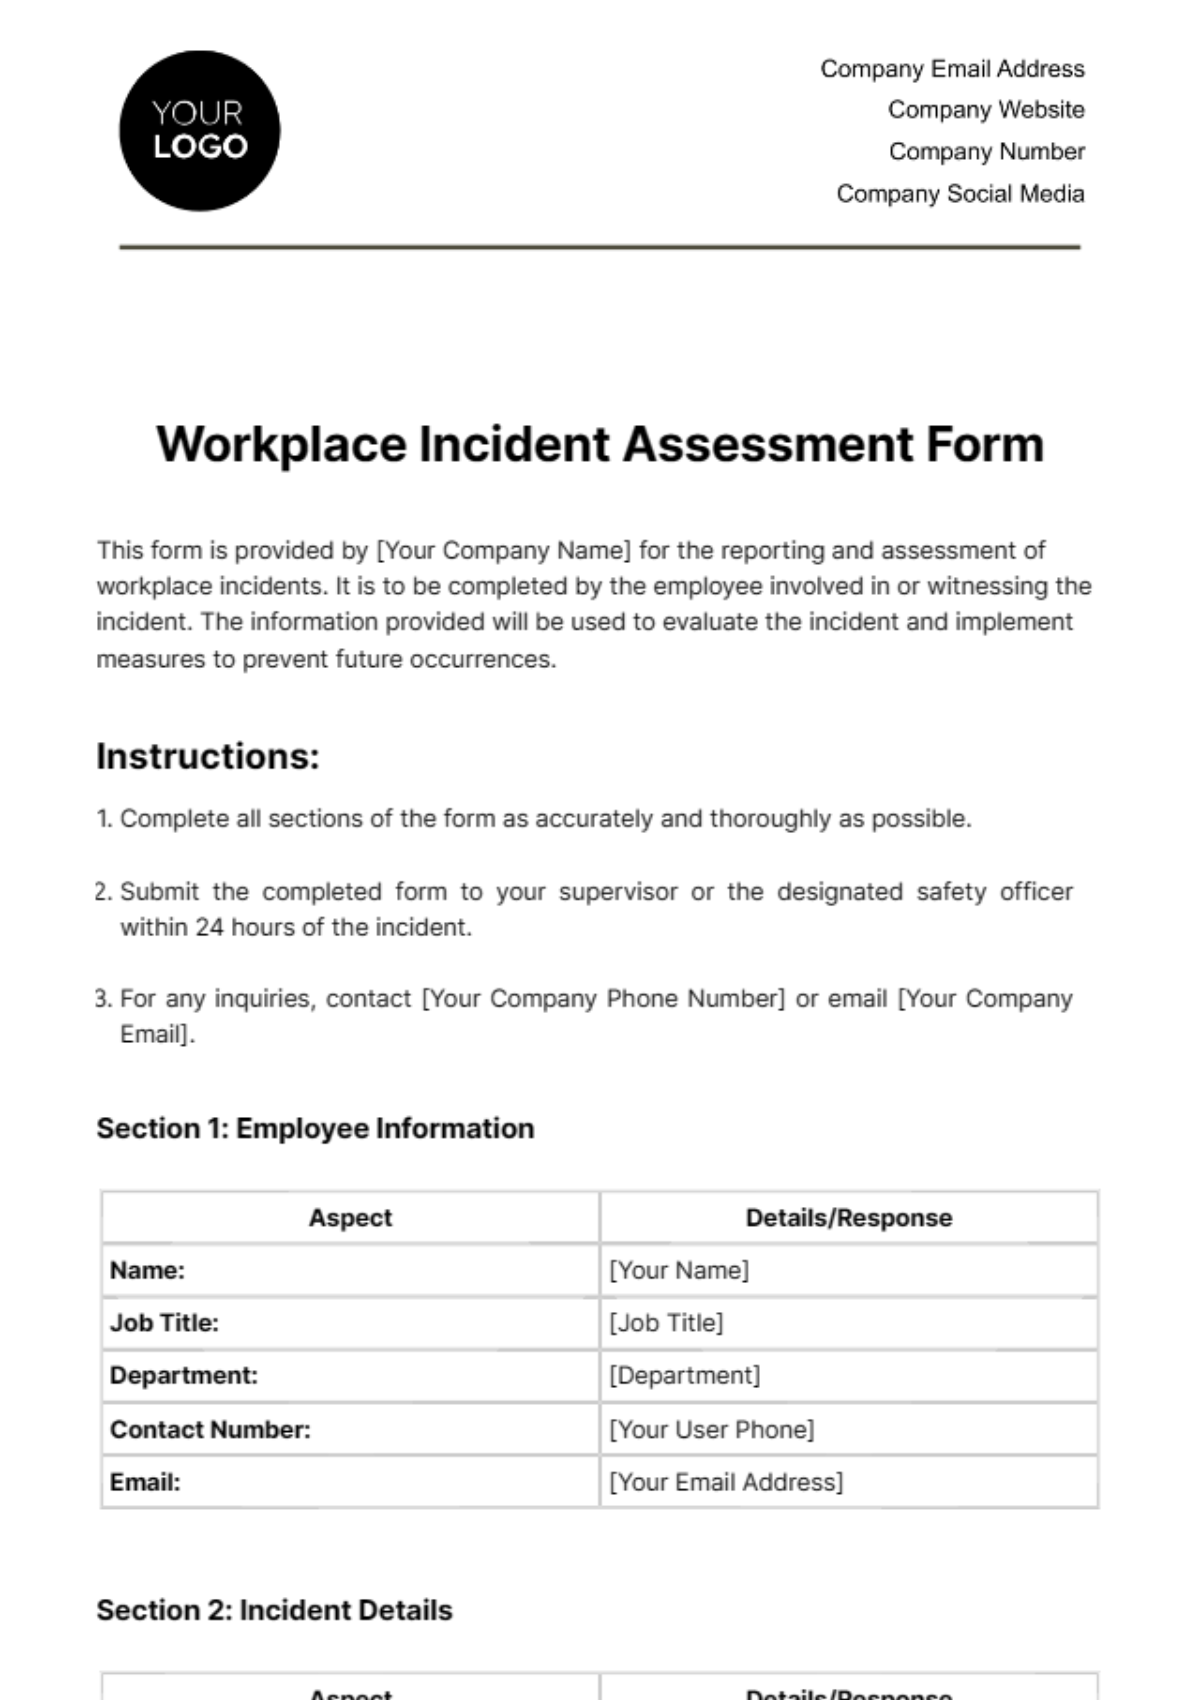 Free Workplace Incident Assessment Form Template